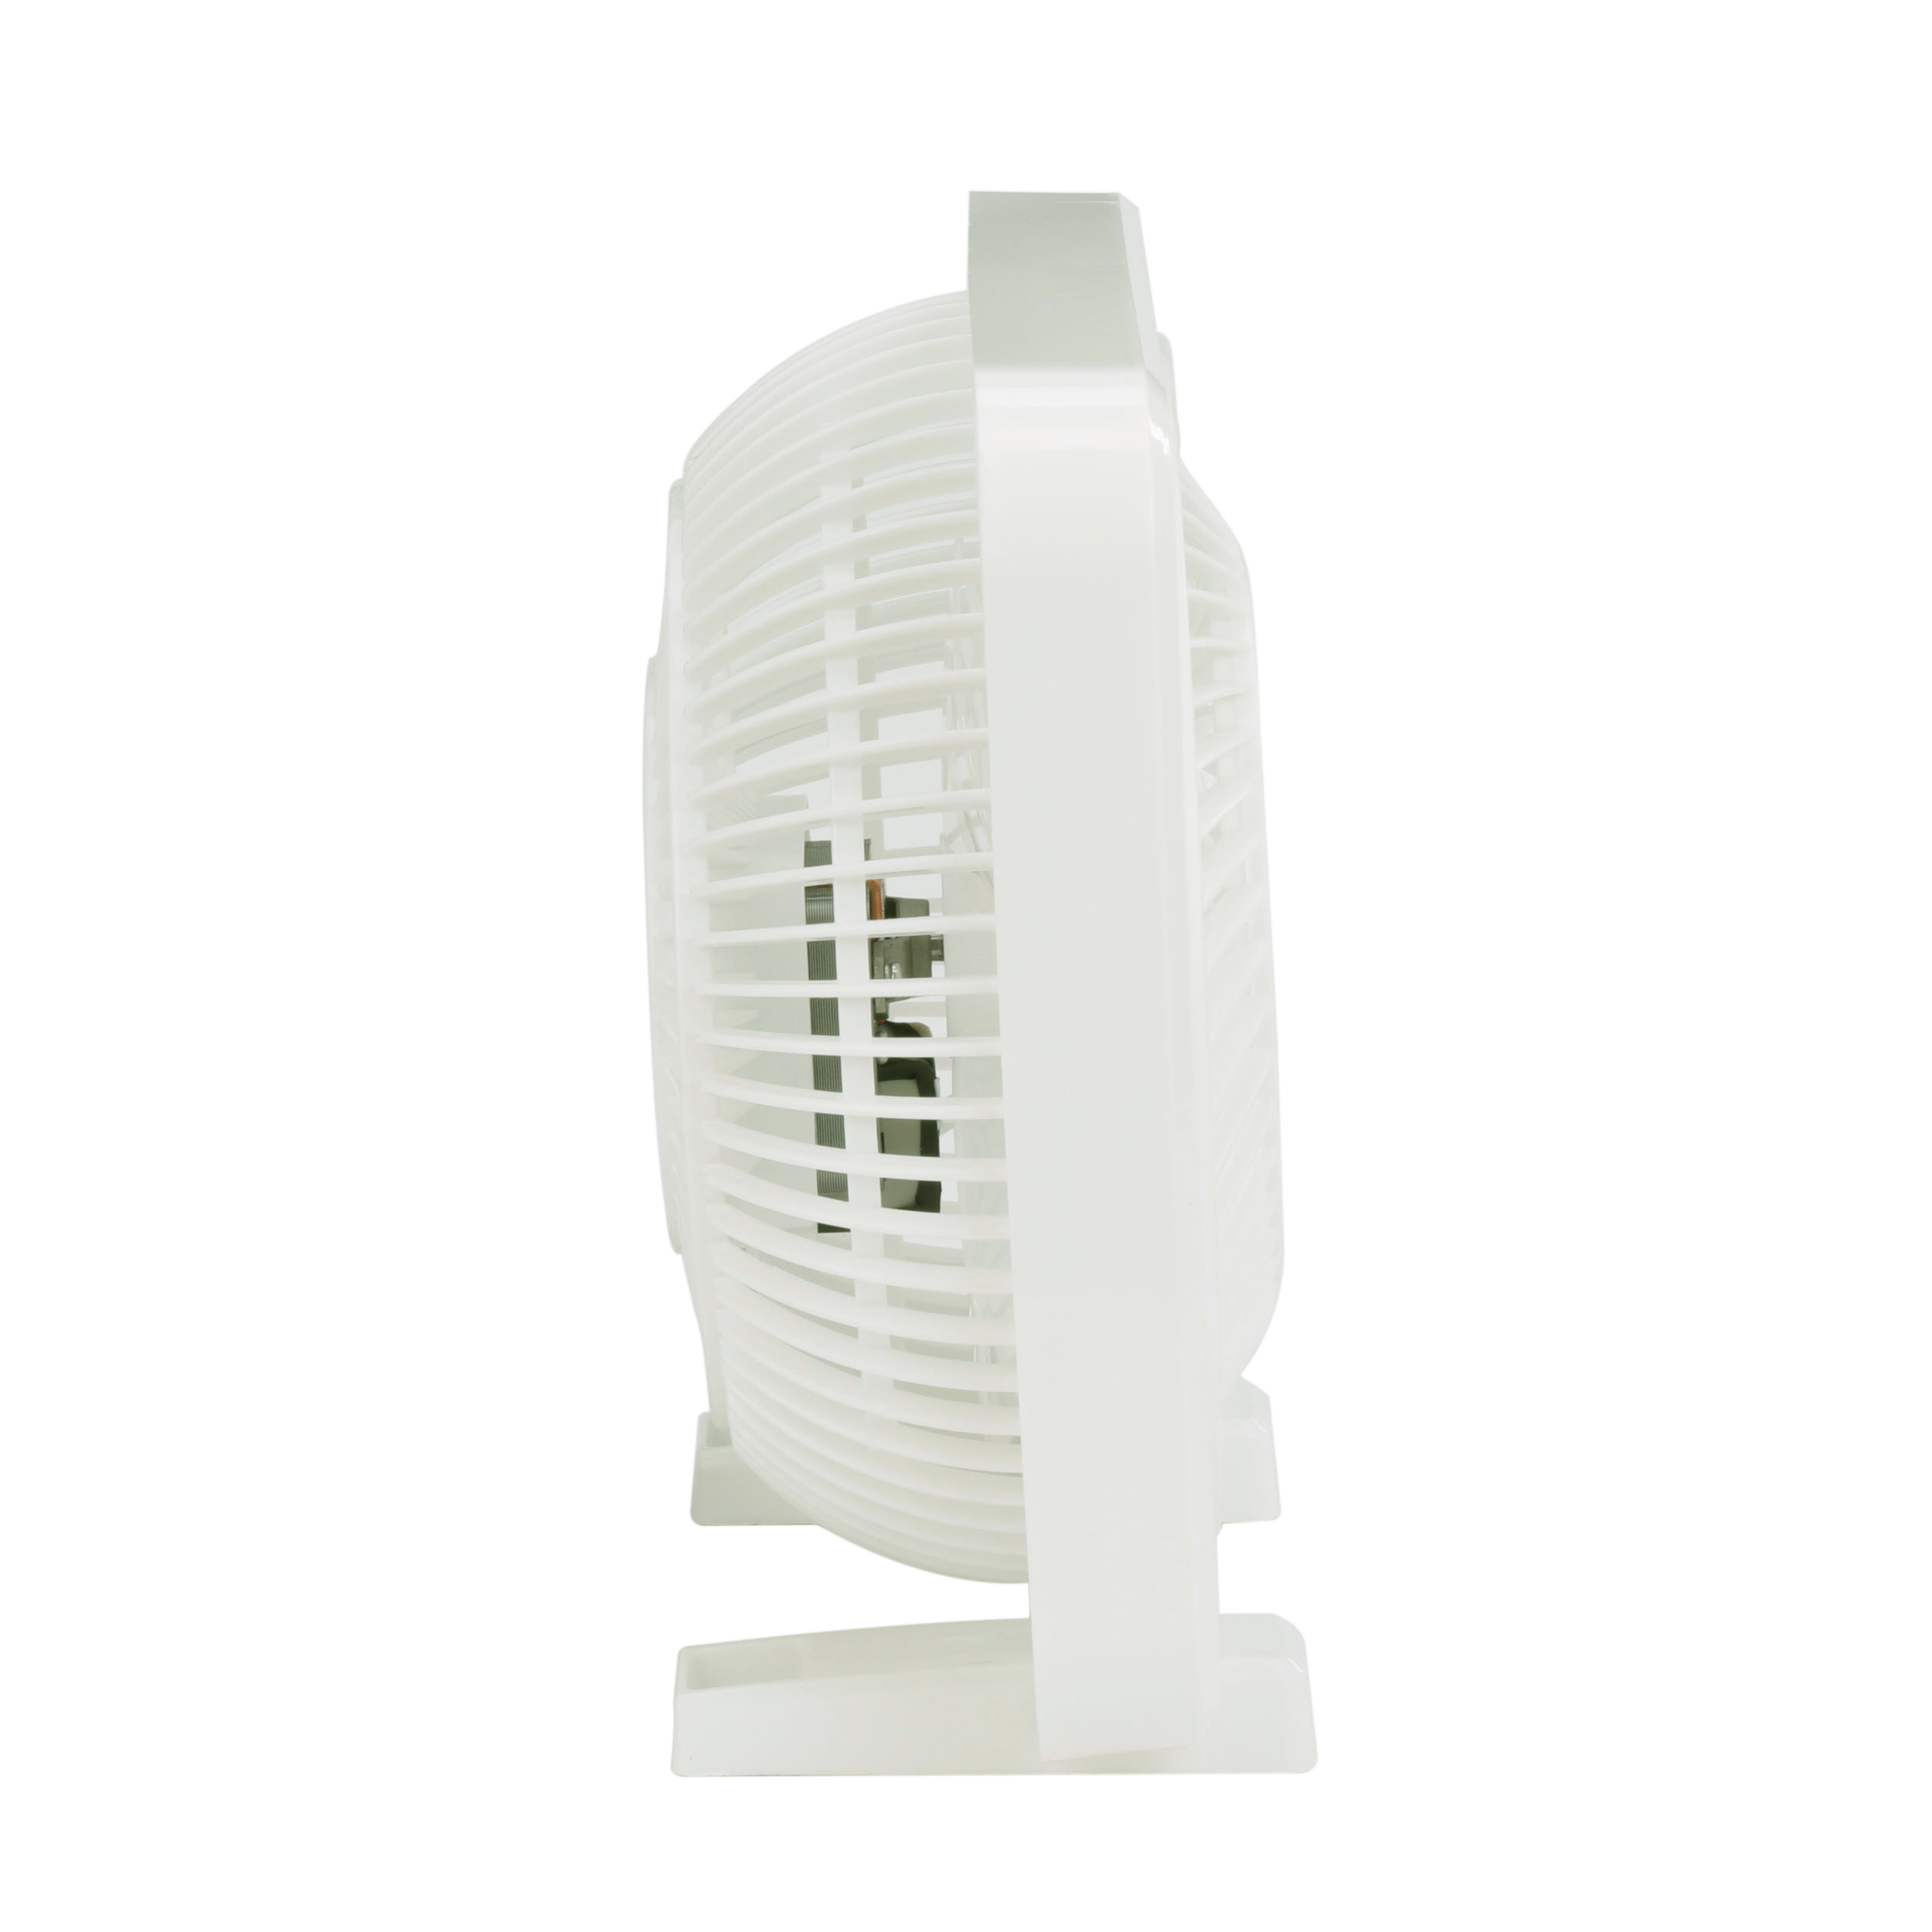 Mainstays 9inch Personal Desktop Fan with 3 Speeds, White - image 4 of 9